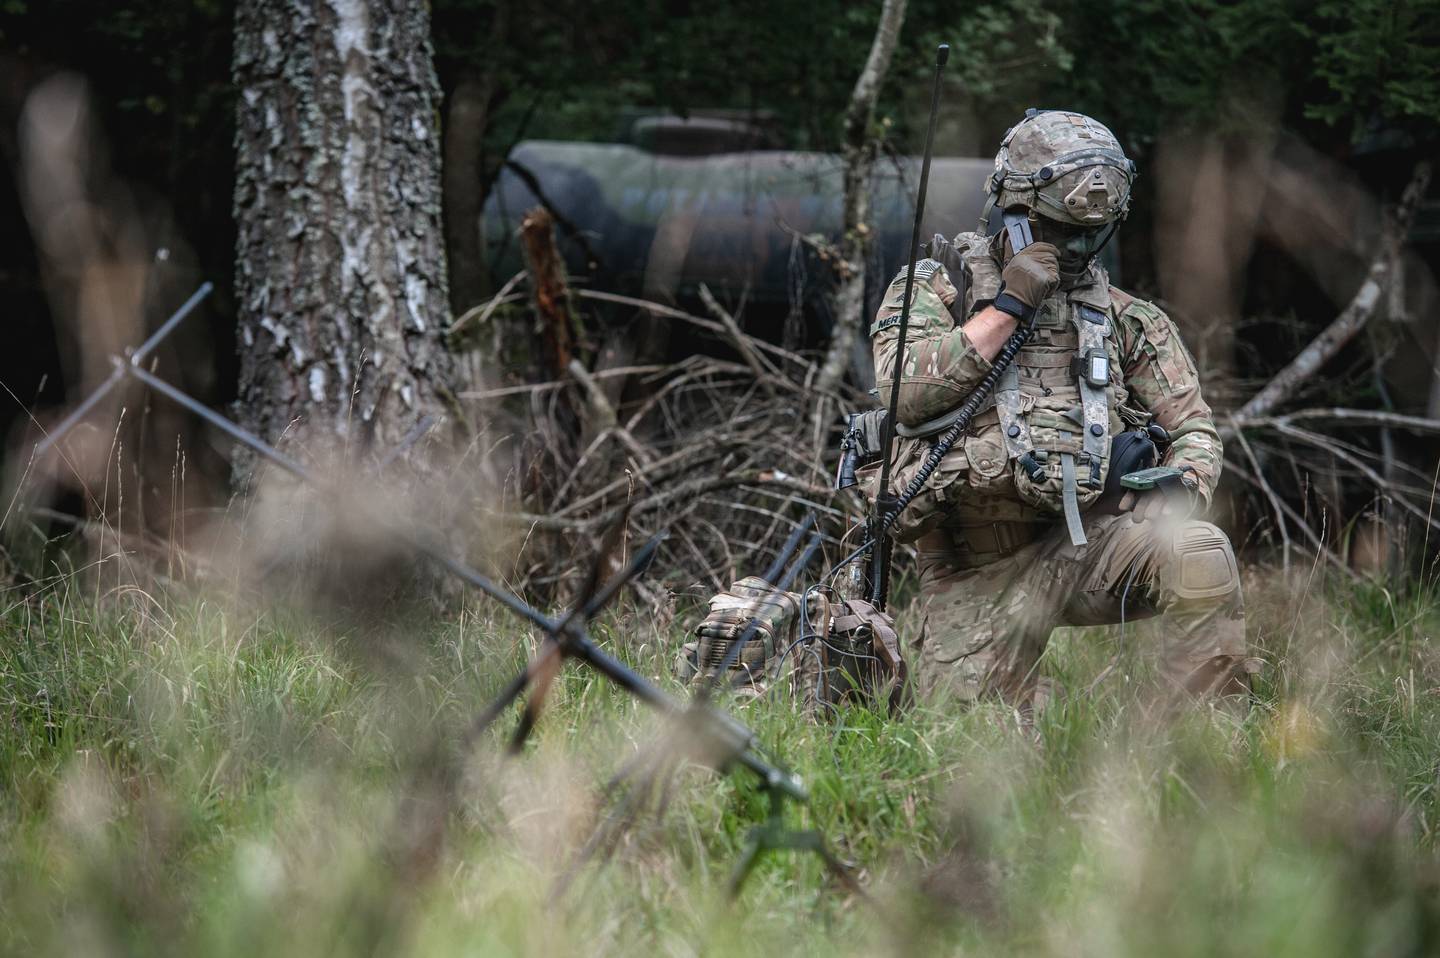 Sgt. Jarred Mertz conducts a radio check with a tactical operations center during Exercise Saber Junction 2019 in Hohenfels Training Area, Germany.